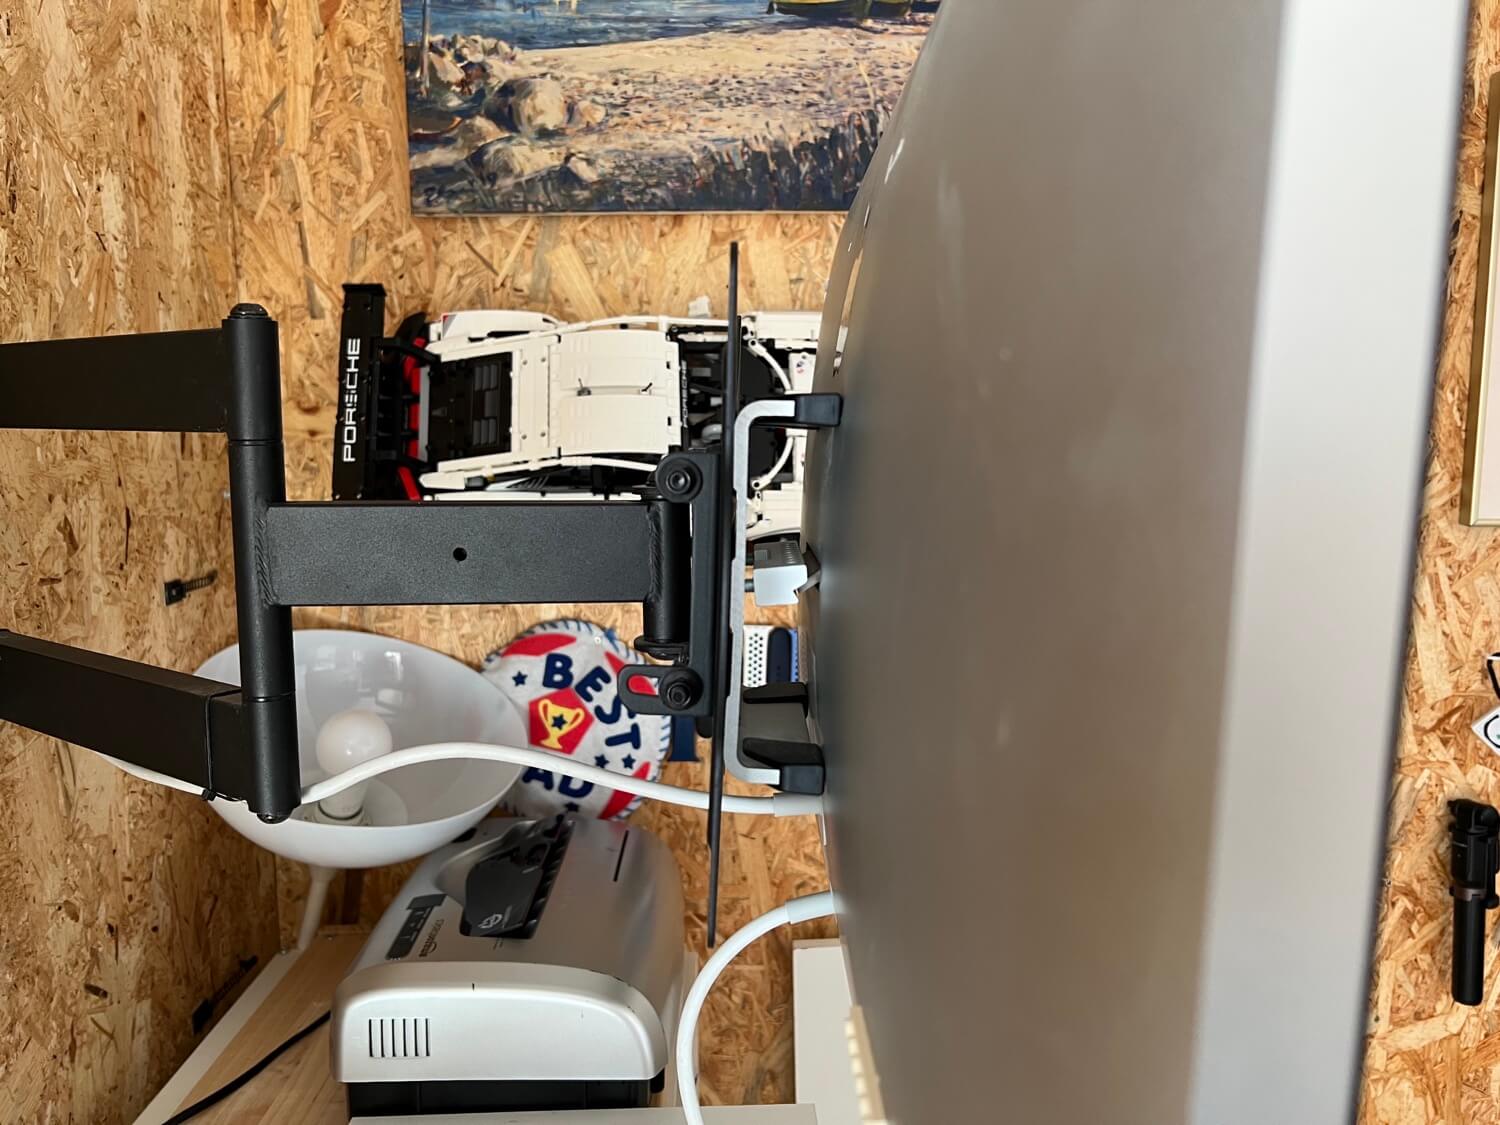 7 lives of a decade-old trusty Apple Thunderbolt Display 2